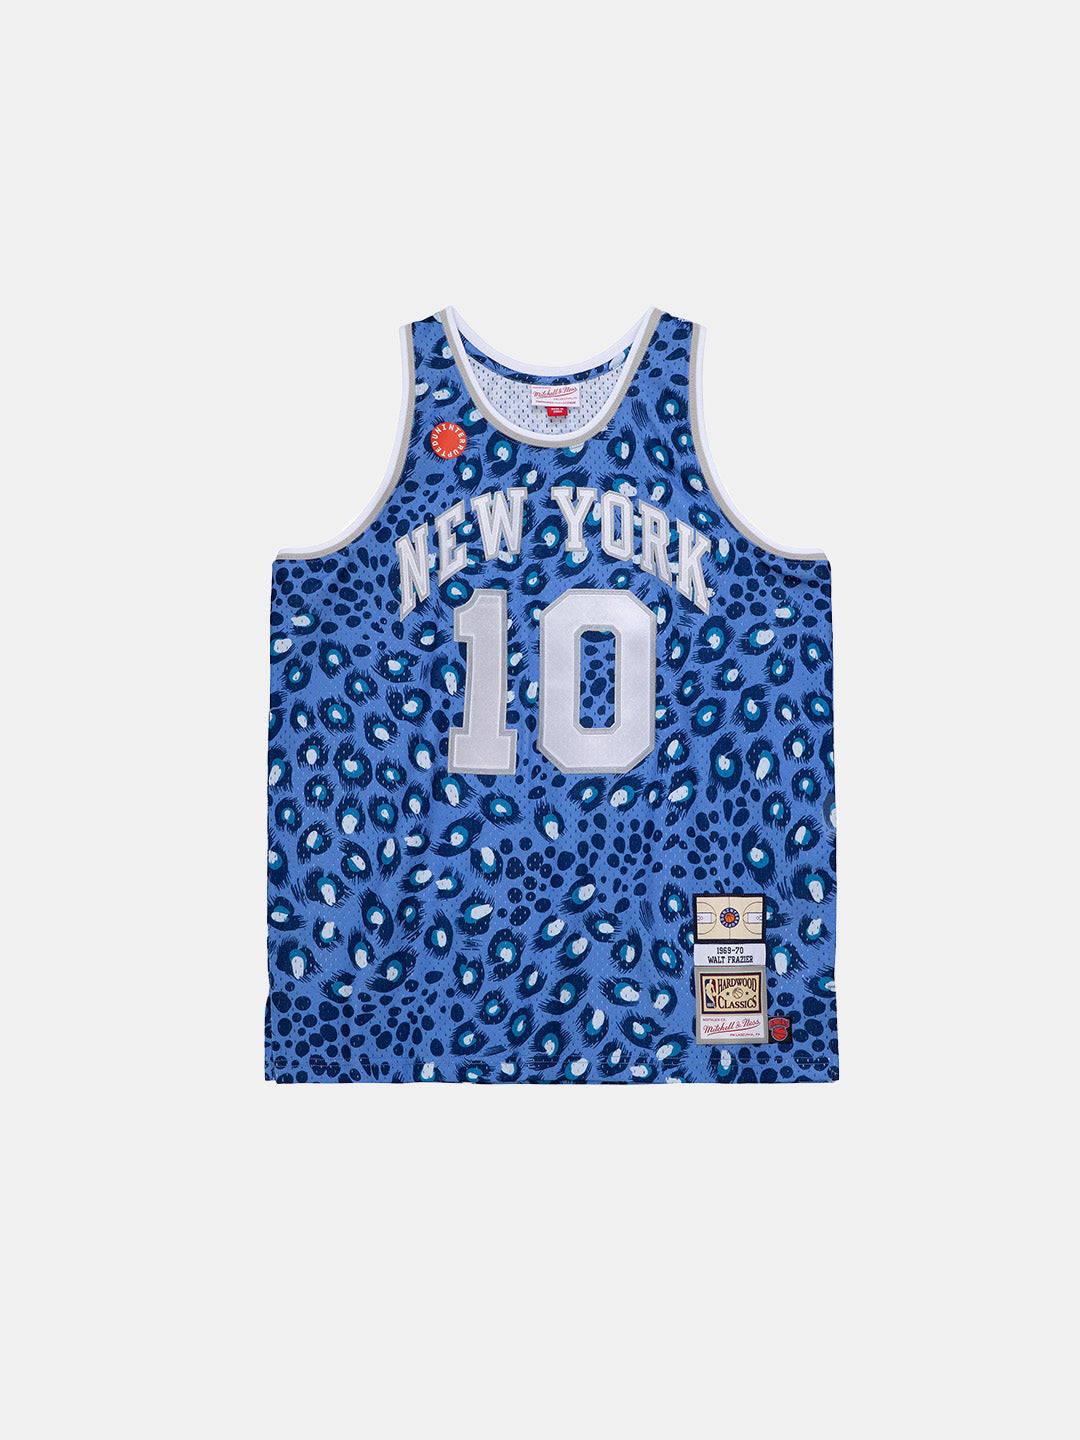 front of jersey- blue with animal print pattern